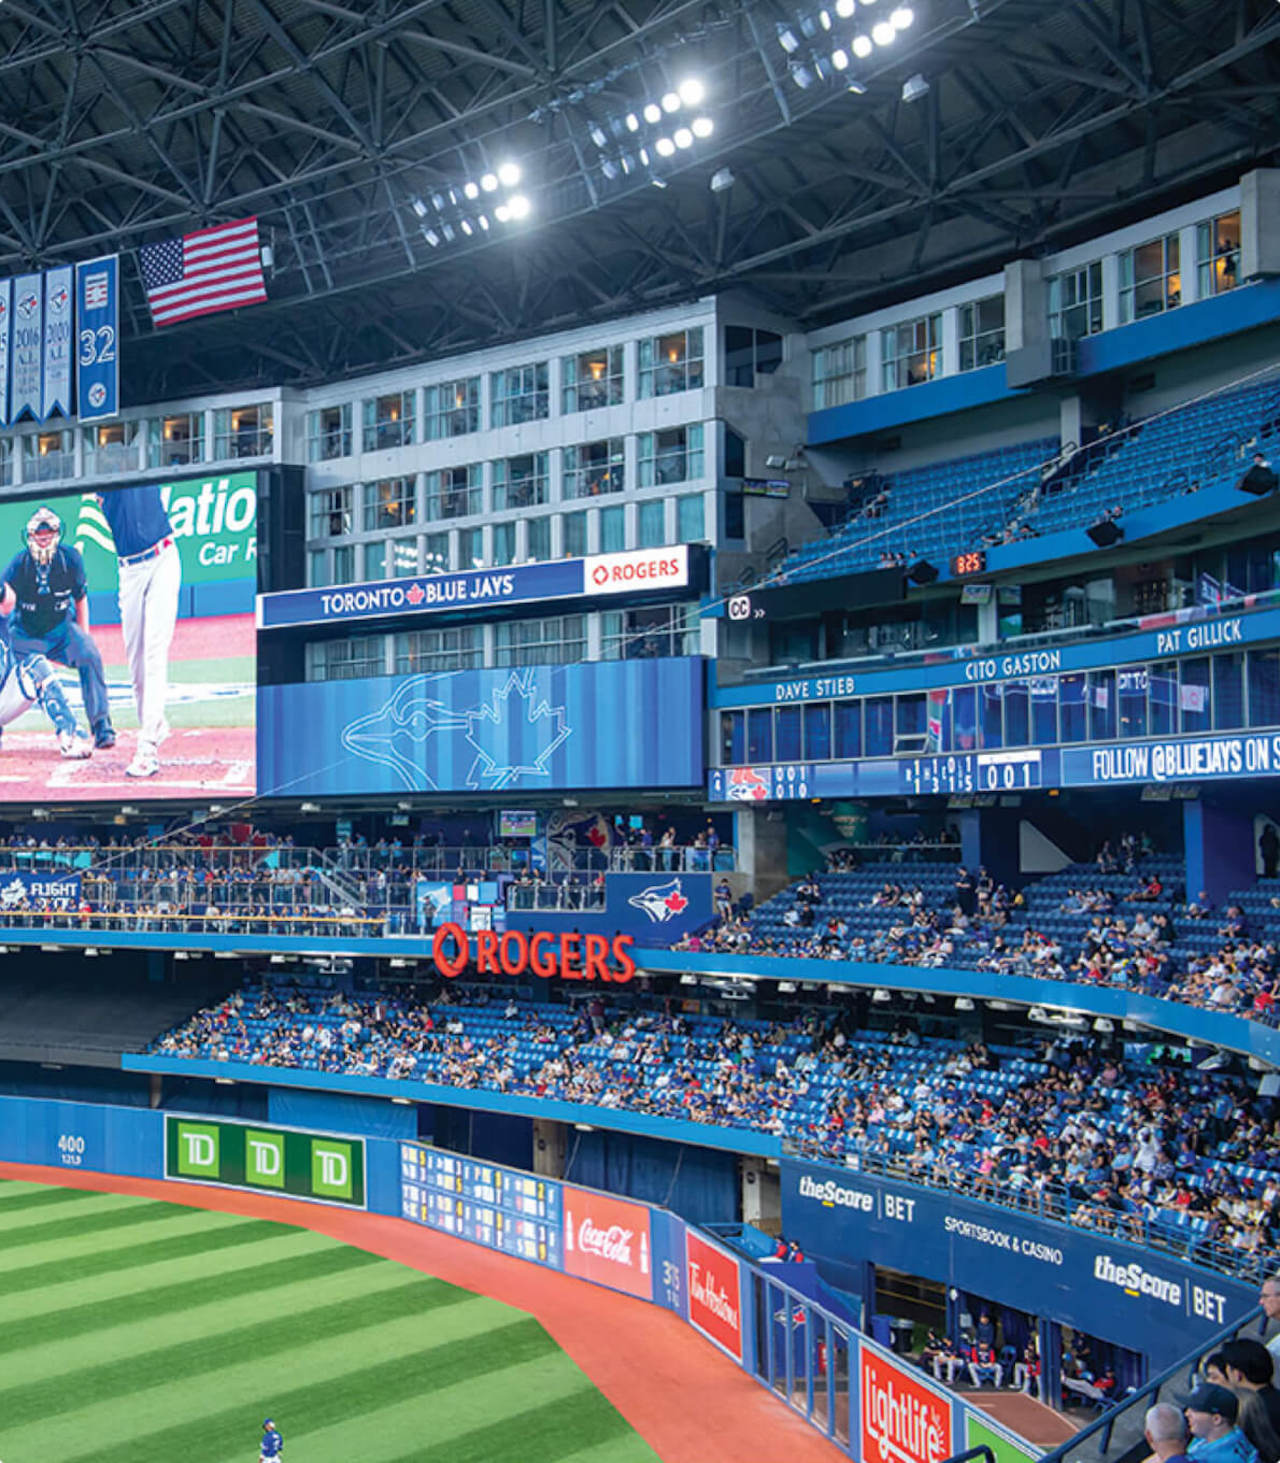 Toronto Blue Jays unveil revamped Rogers Centre ahead of home